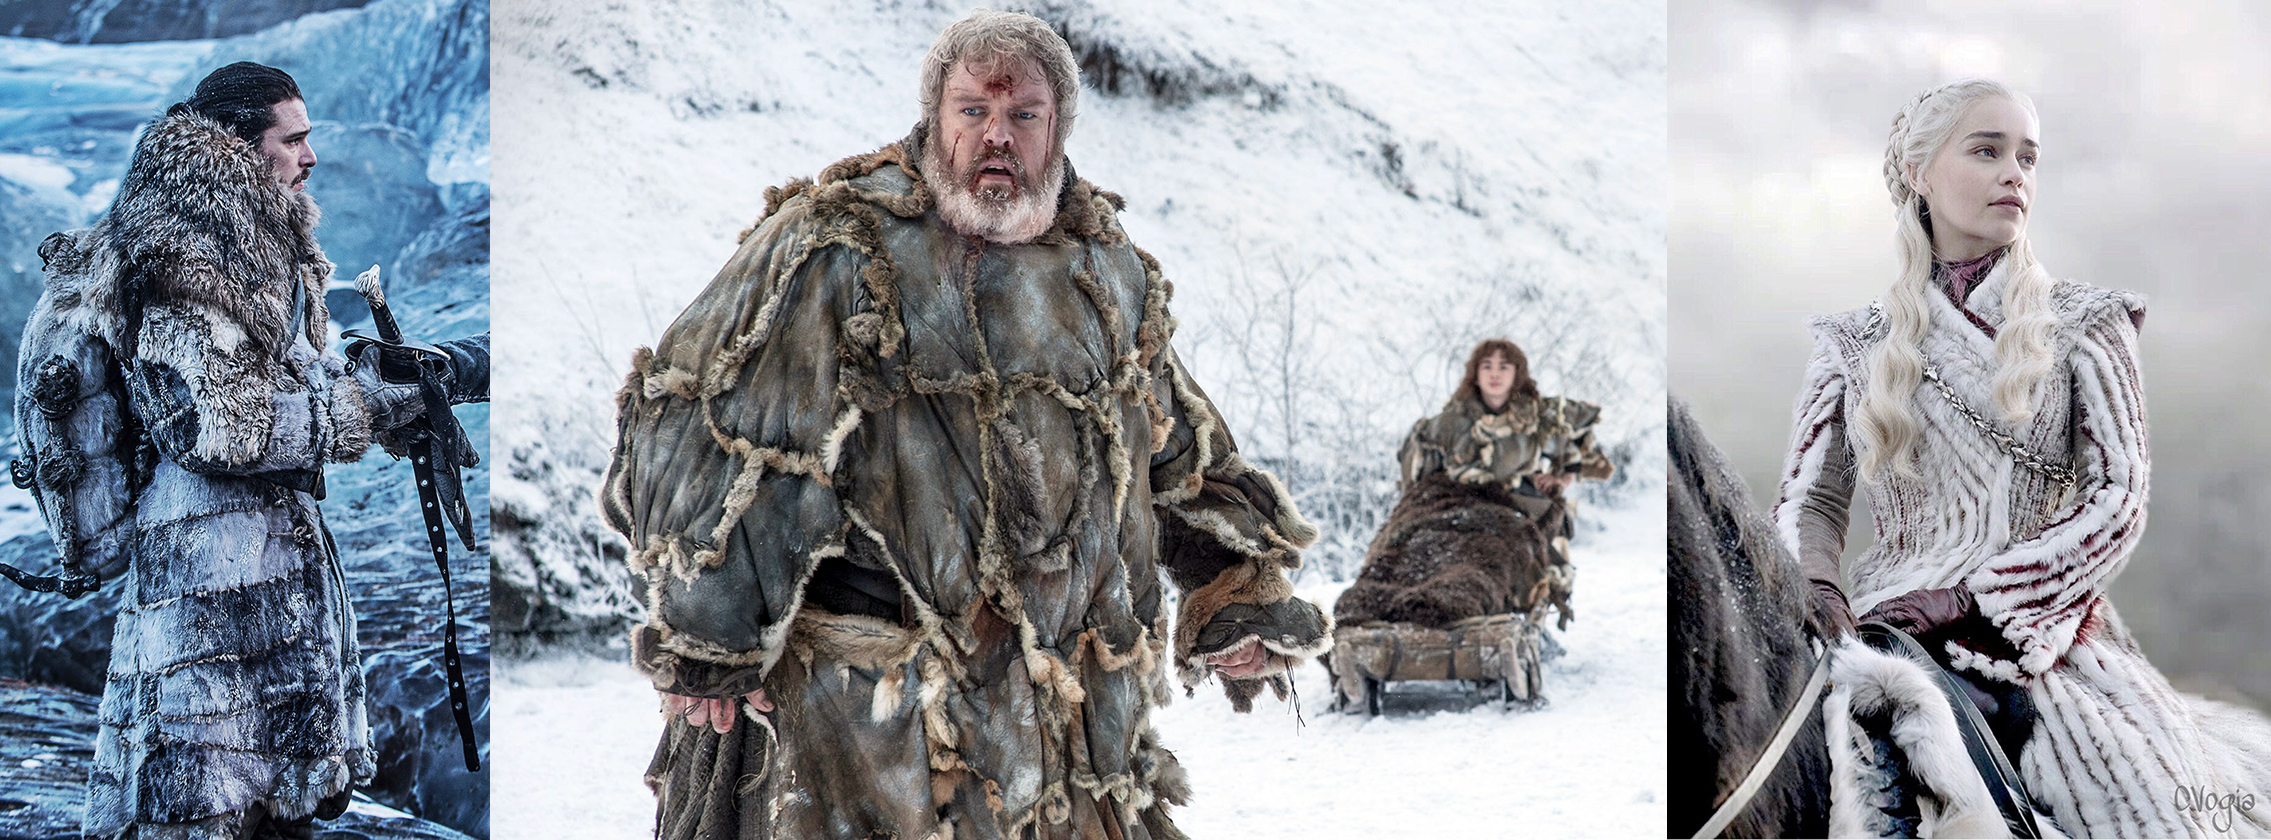 Three different characters from tv series game of thrones wearing different costumes in the snow